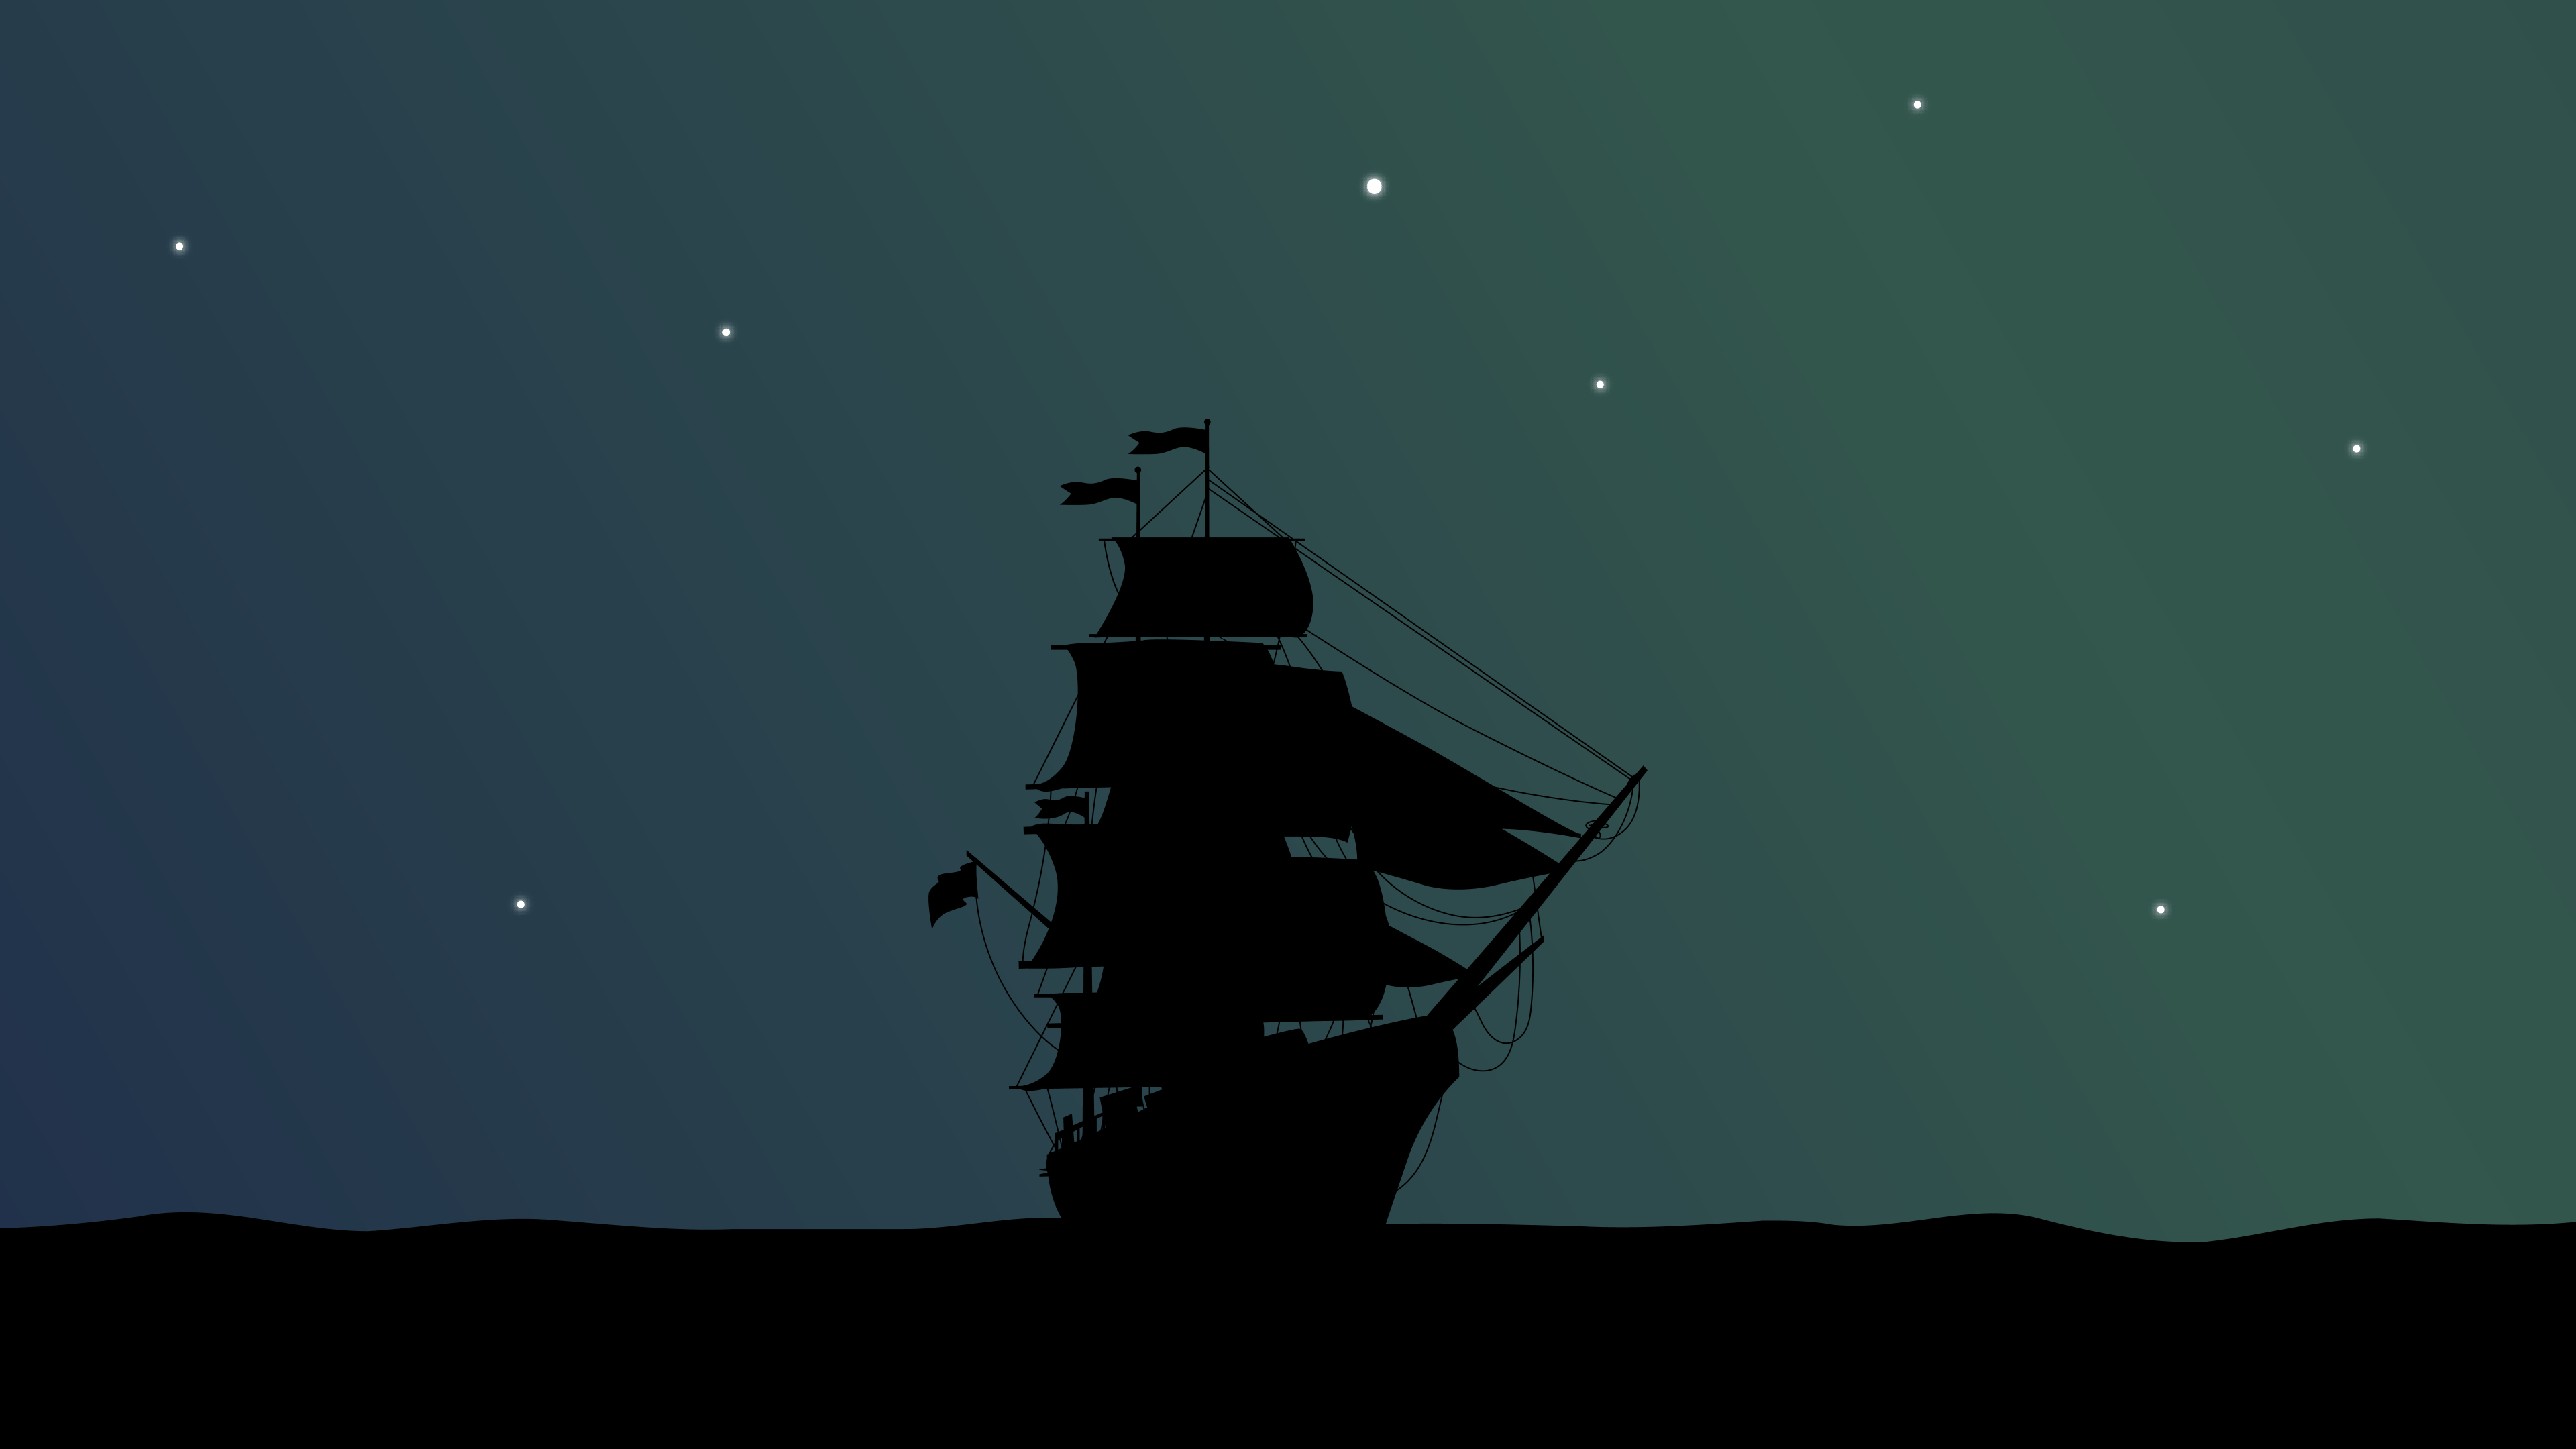 A ship is sailing on the ocean - Pirate